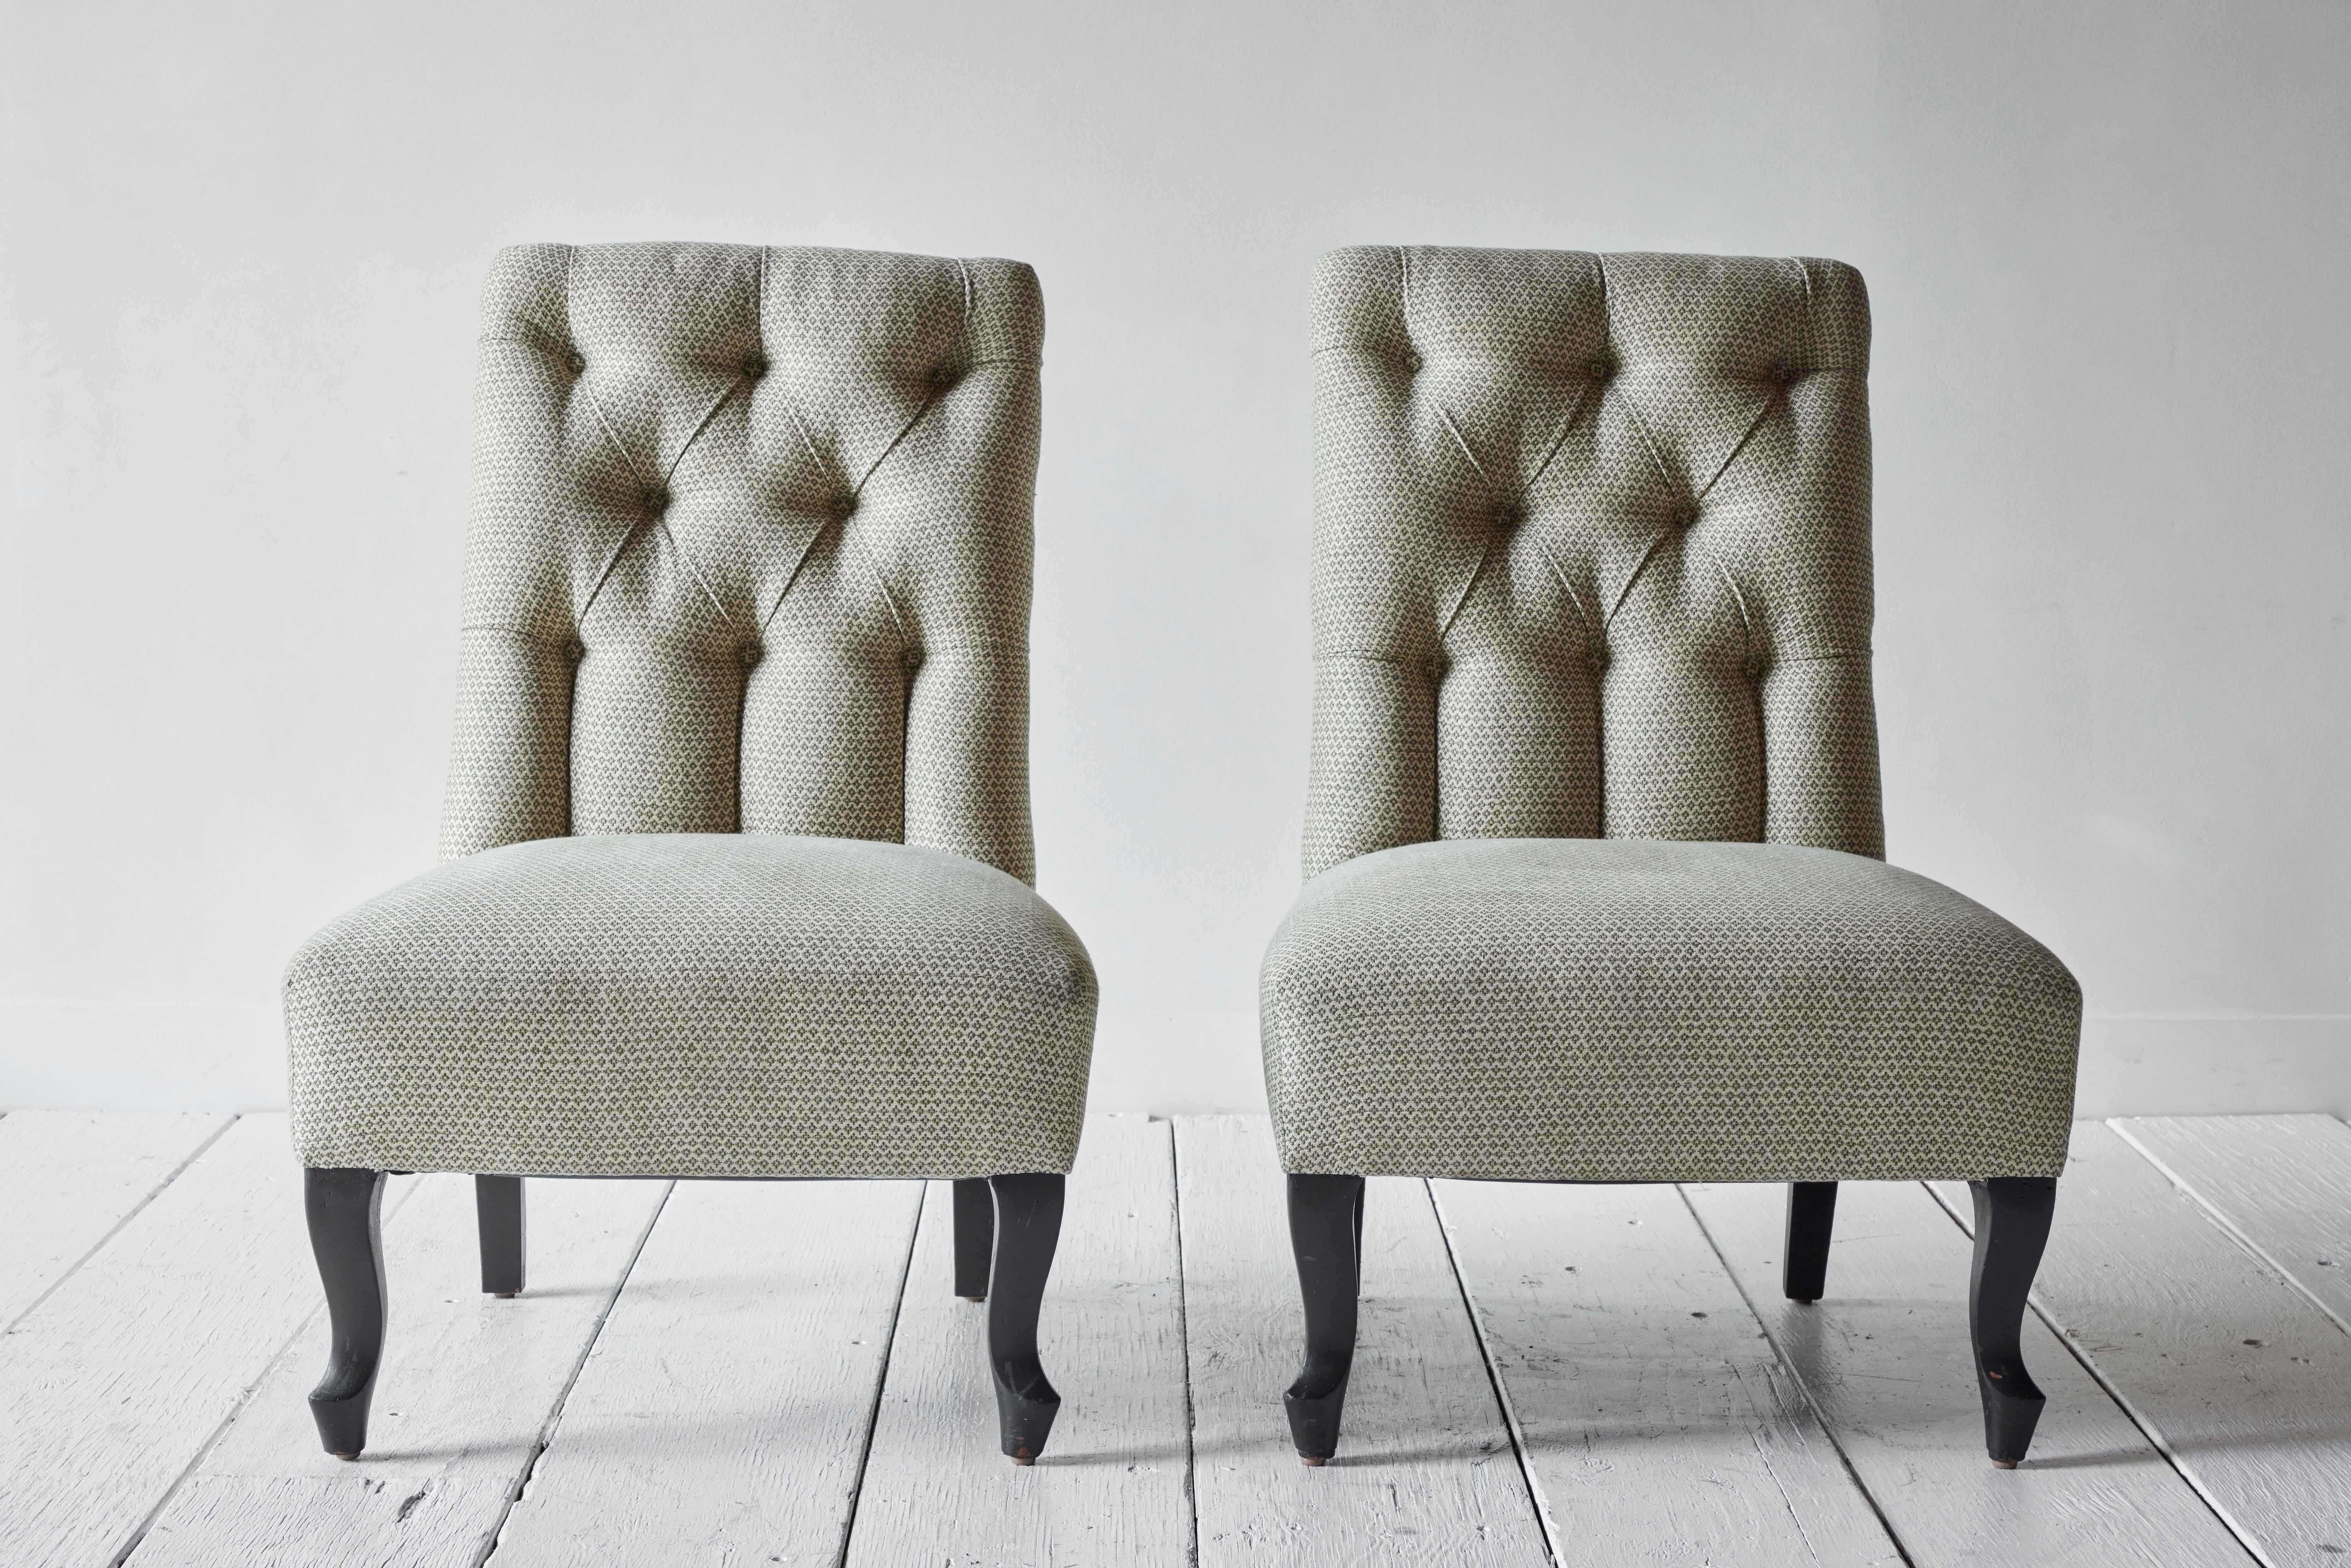 Pair of 19th century French tufted slipper chairs reimagined with new fabric in Moss Mini Weave by Susan Deliss. This sweet pair sits on black stained cabriole legs with brass casters.